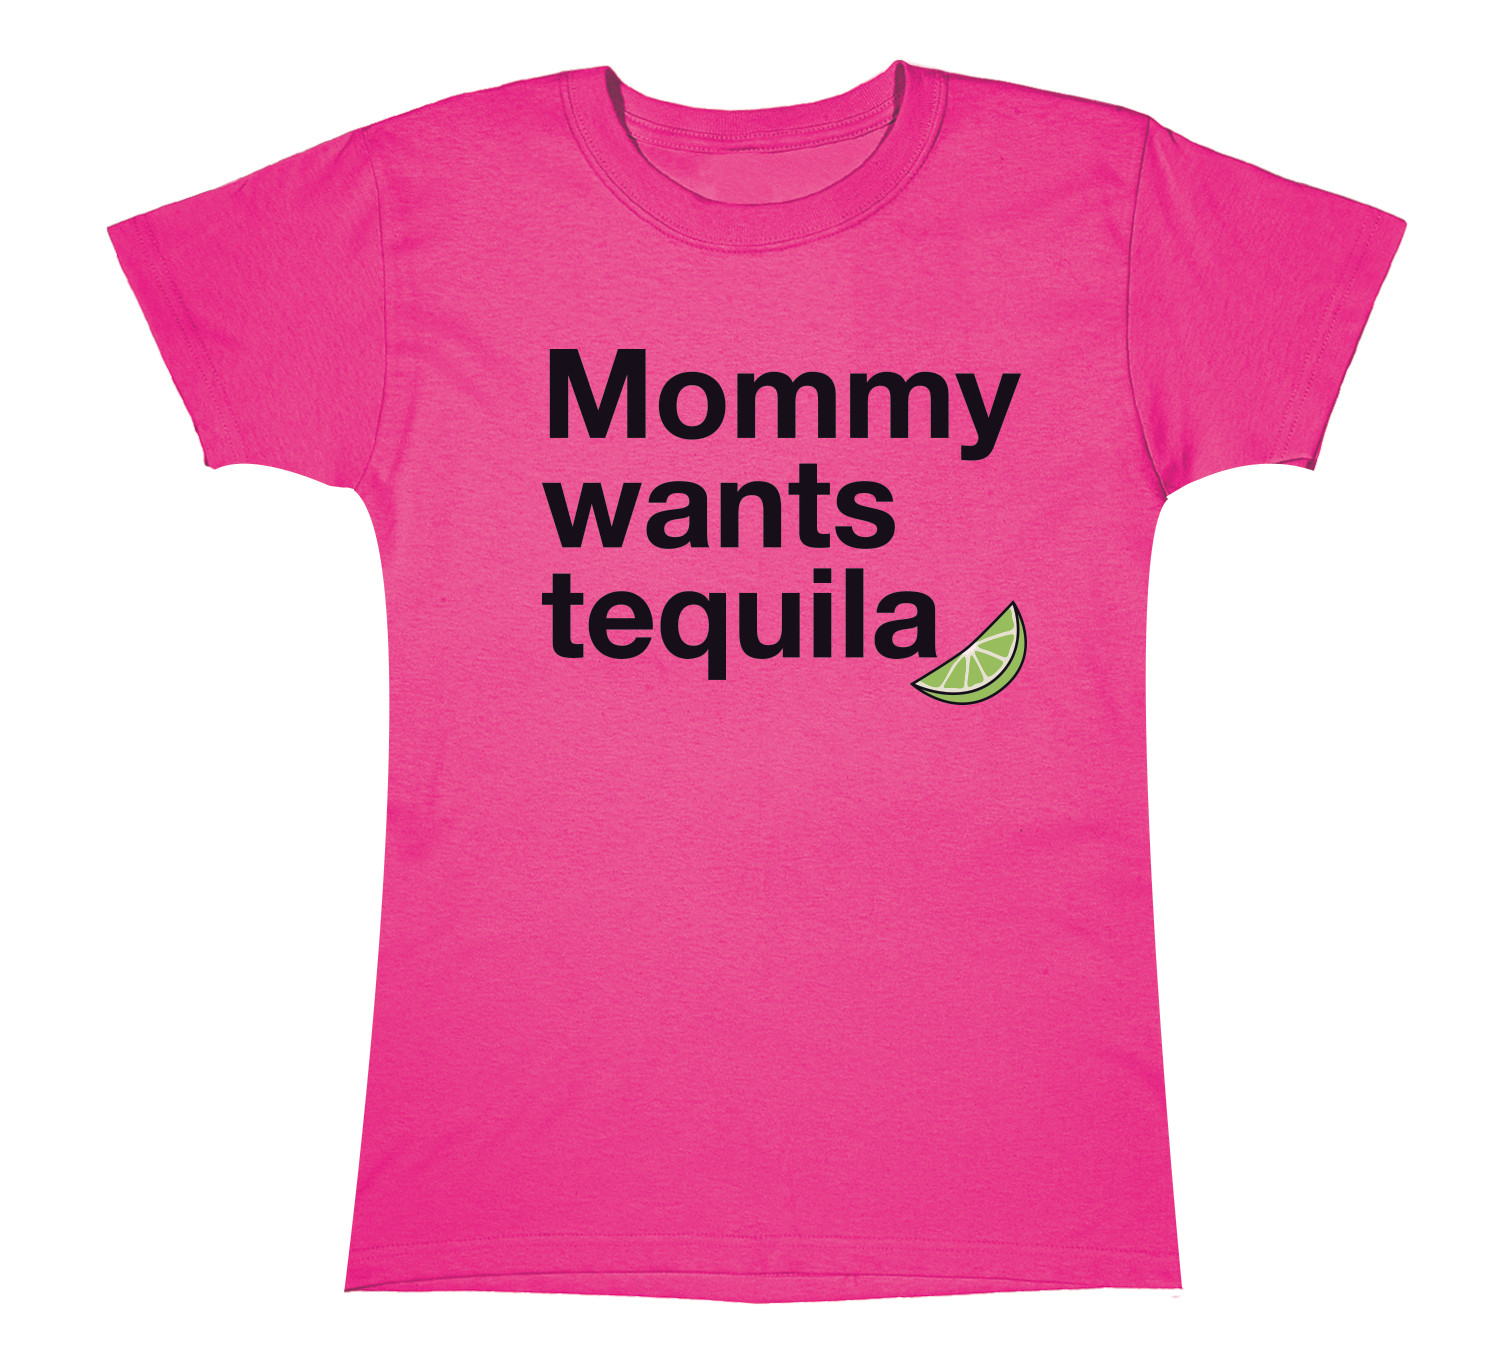 Funny Mother's Day Quotes
 Mommy Wants Tequila Funny Mother s Day Drinking Novelty